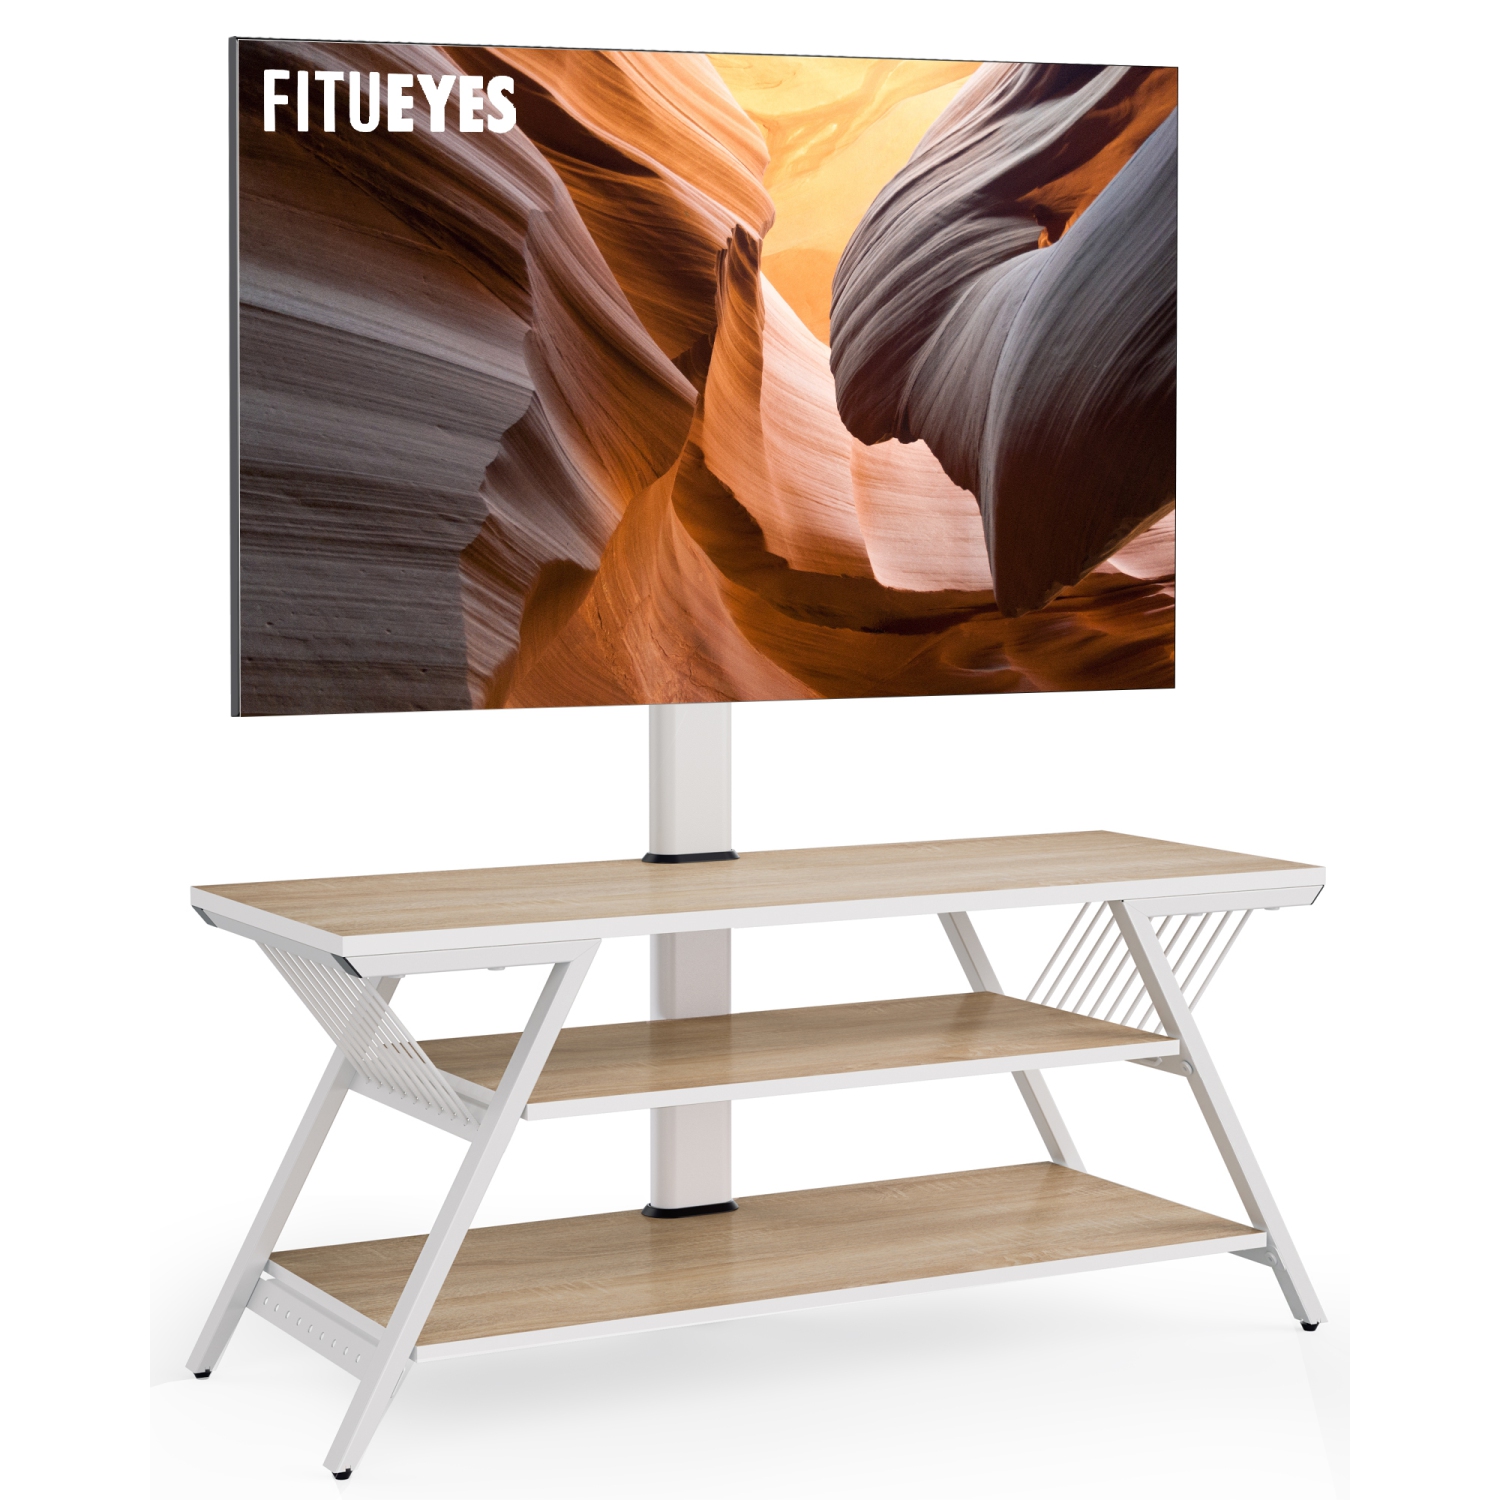 FITUEYES White TV Stand with Mount 3 Tier for 32 - 65 inch TV Cabinet Table with Open Storage & Height Adjustable for LCD/LED Flat Curved Screens Max VESA 600x400mm